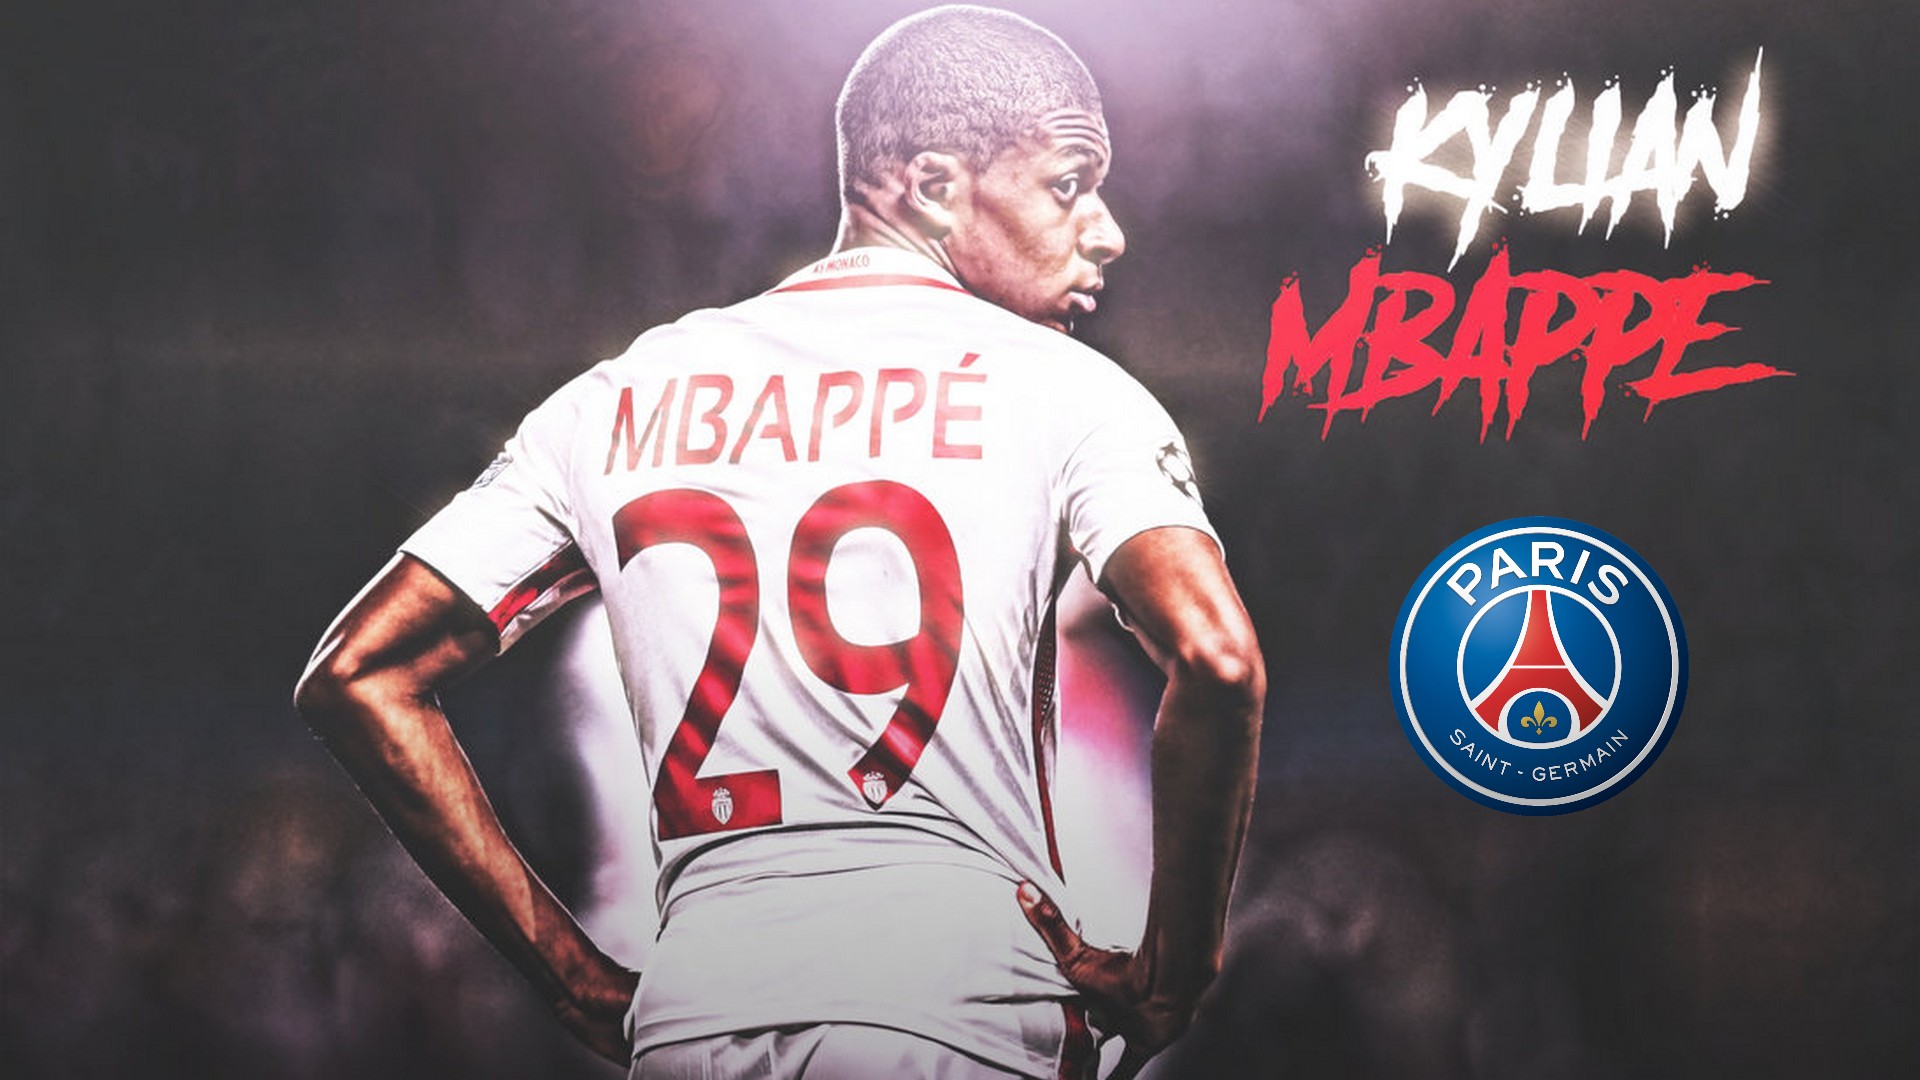 Kylian Mbappe PSG Wallpaper With Resolution 1920X1080 pixel. You can make this wallpaper for your Mac or Windows Desktop Background, iPhone, Android or Tablet and another Smartphone device for free